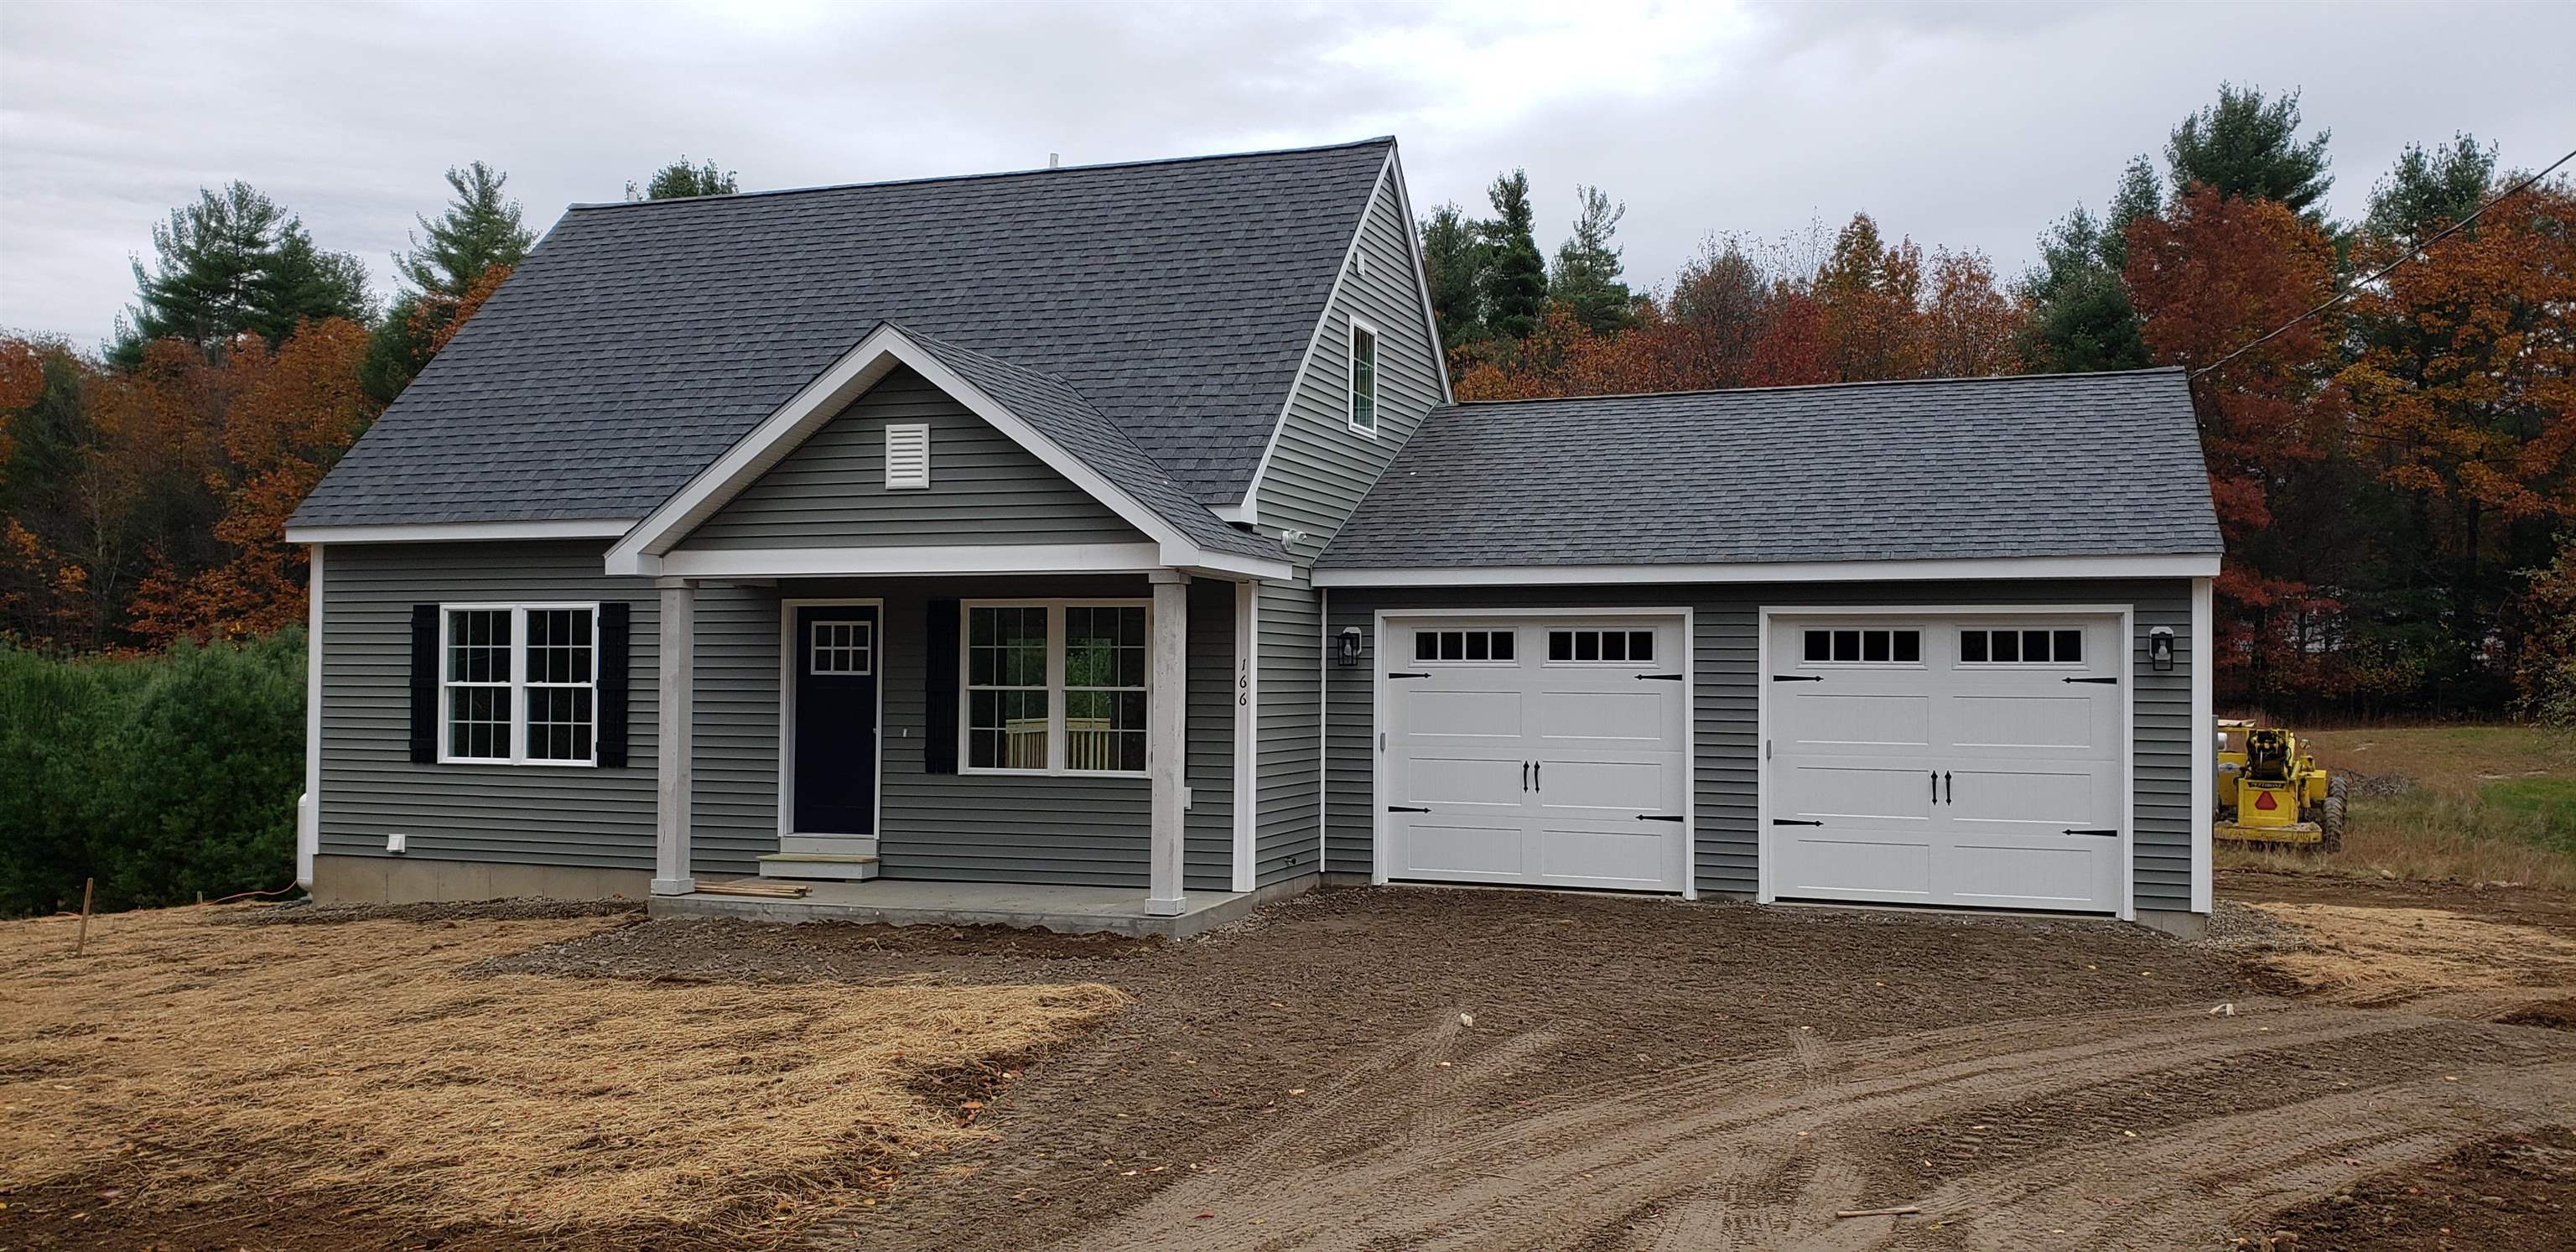 0 Middle Oxbow Road Map 21 Lot 8, Hinsdale, NH 03451